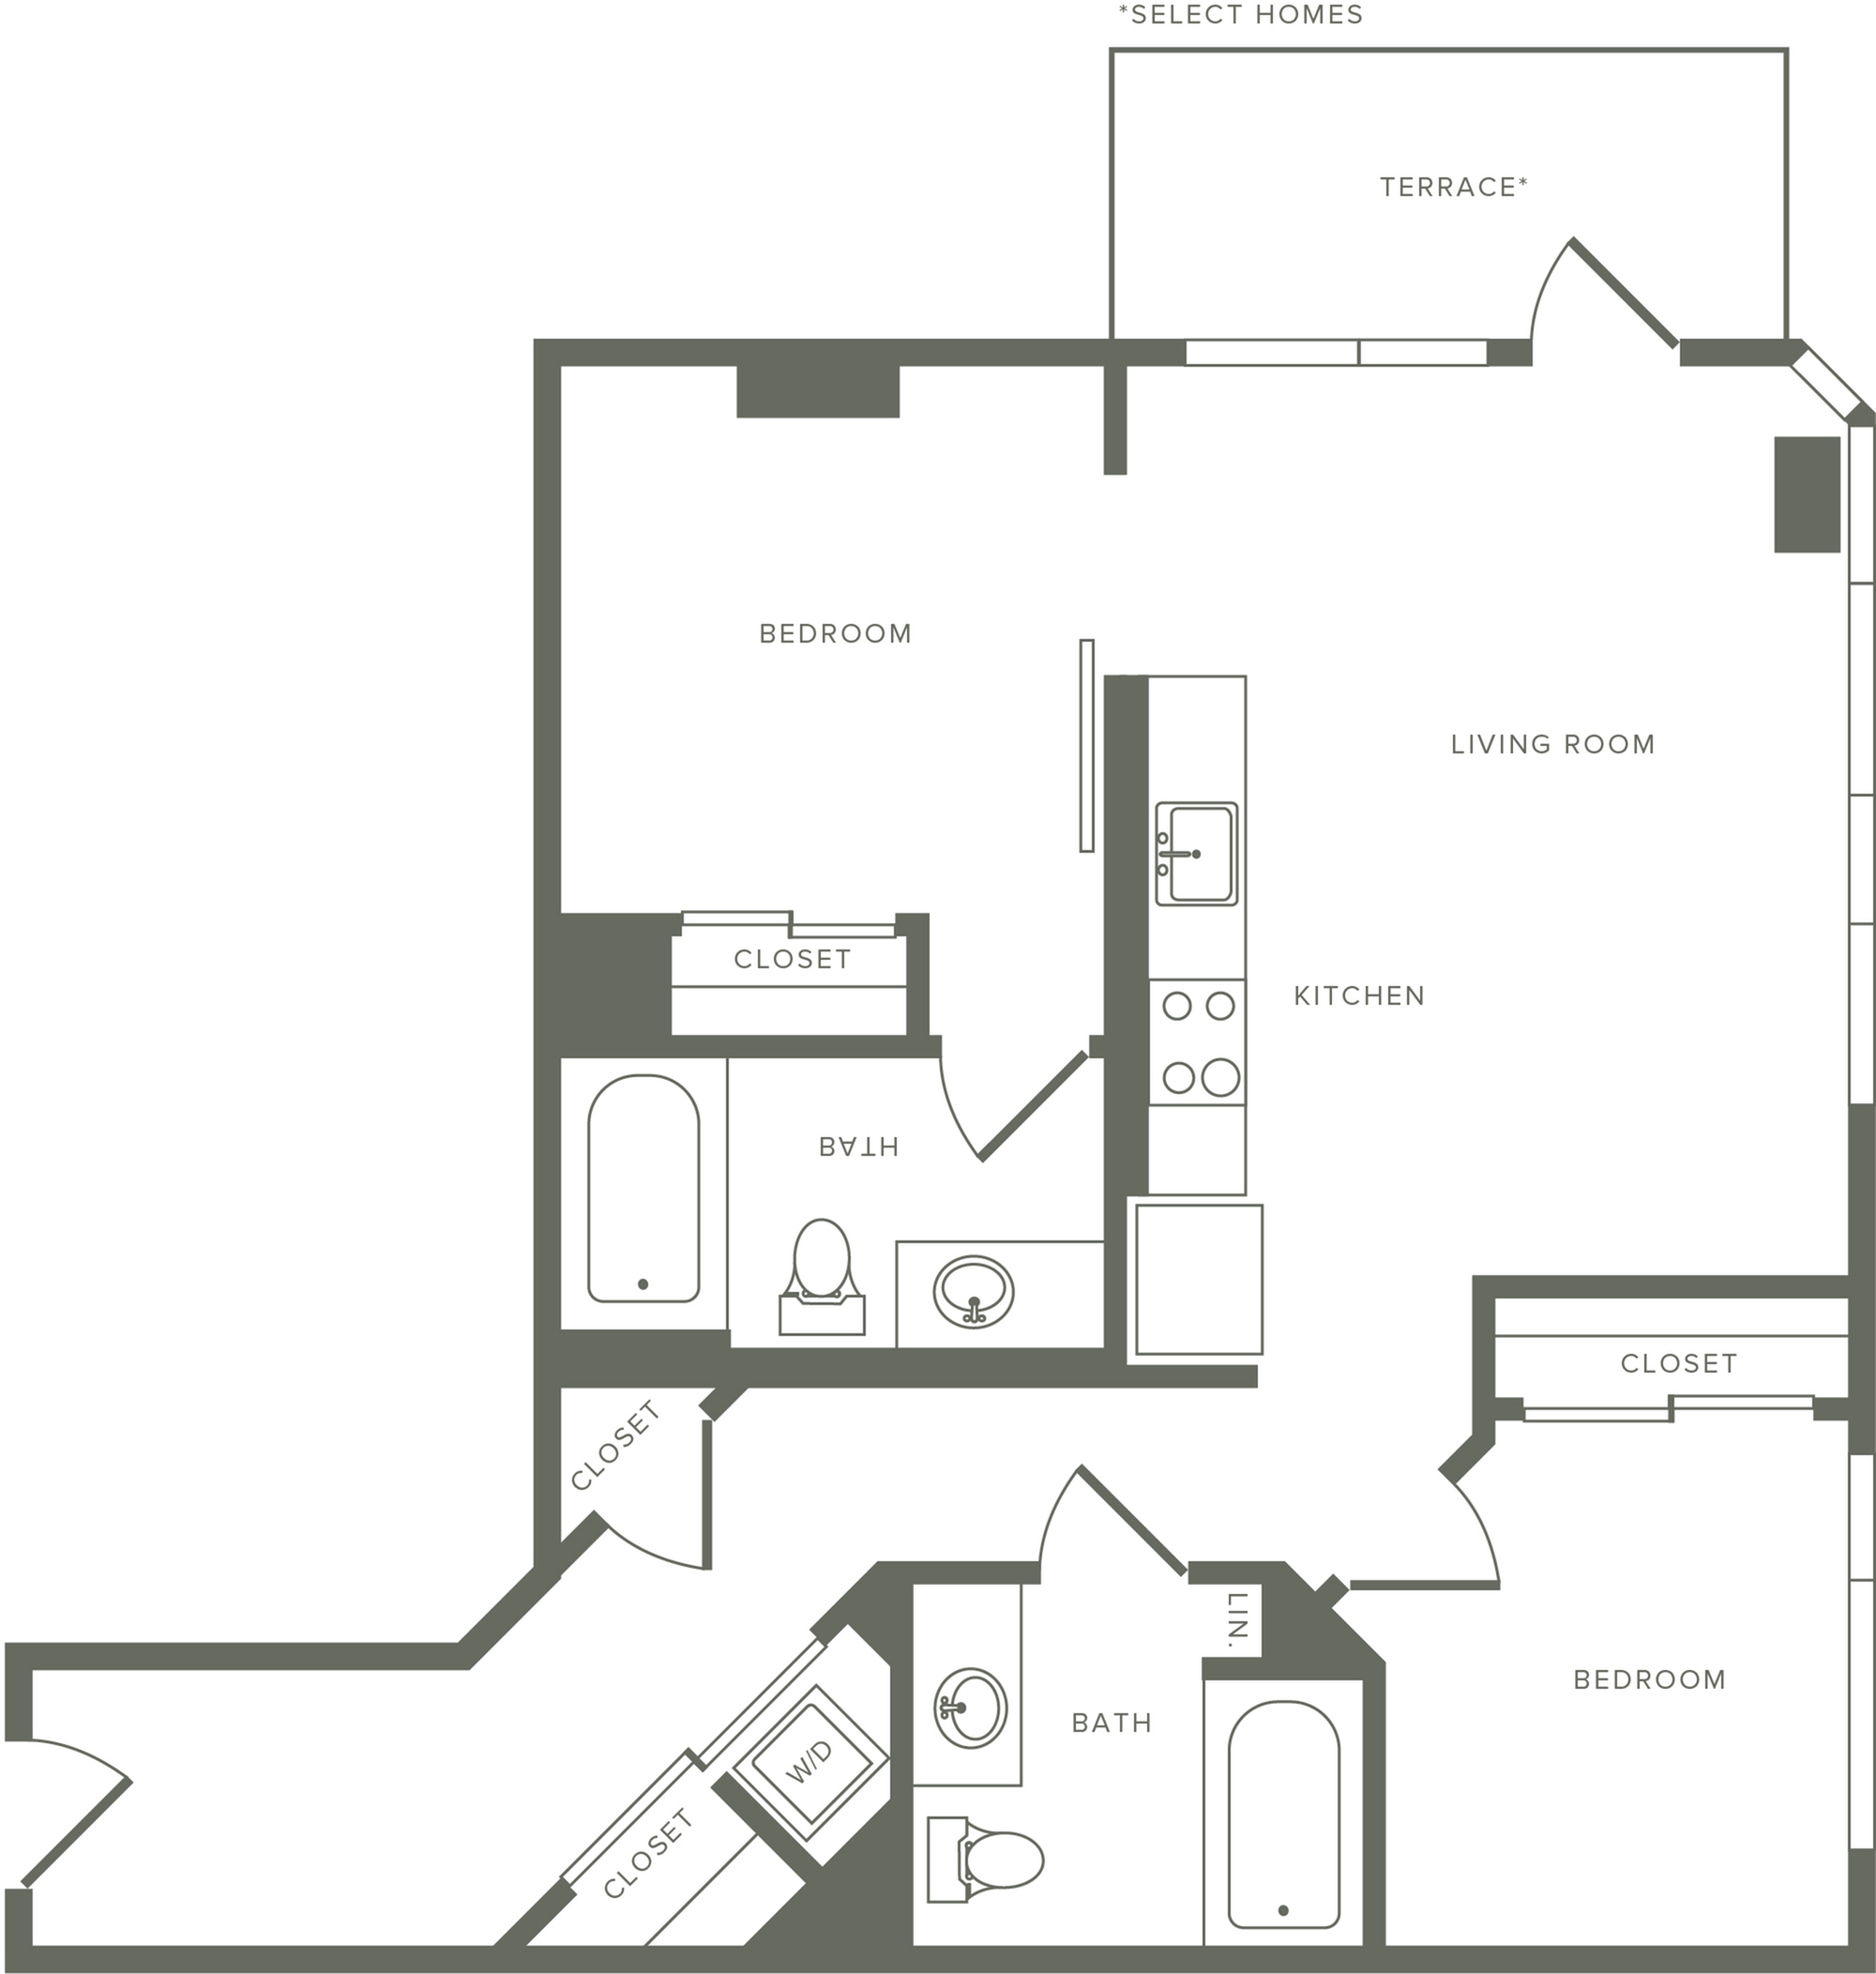 914-937 square foot two bedroom two bath floor plan image